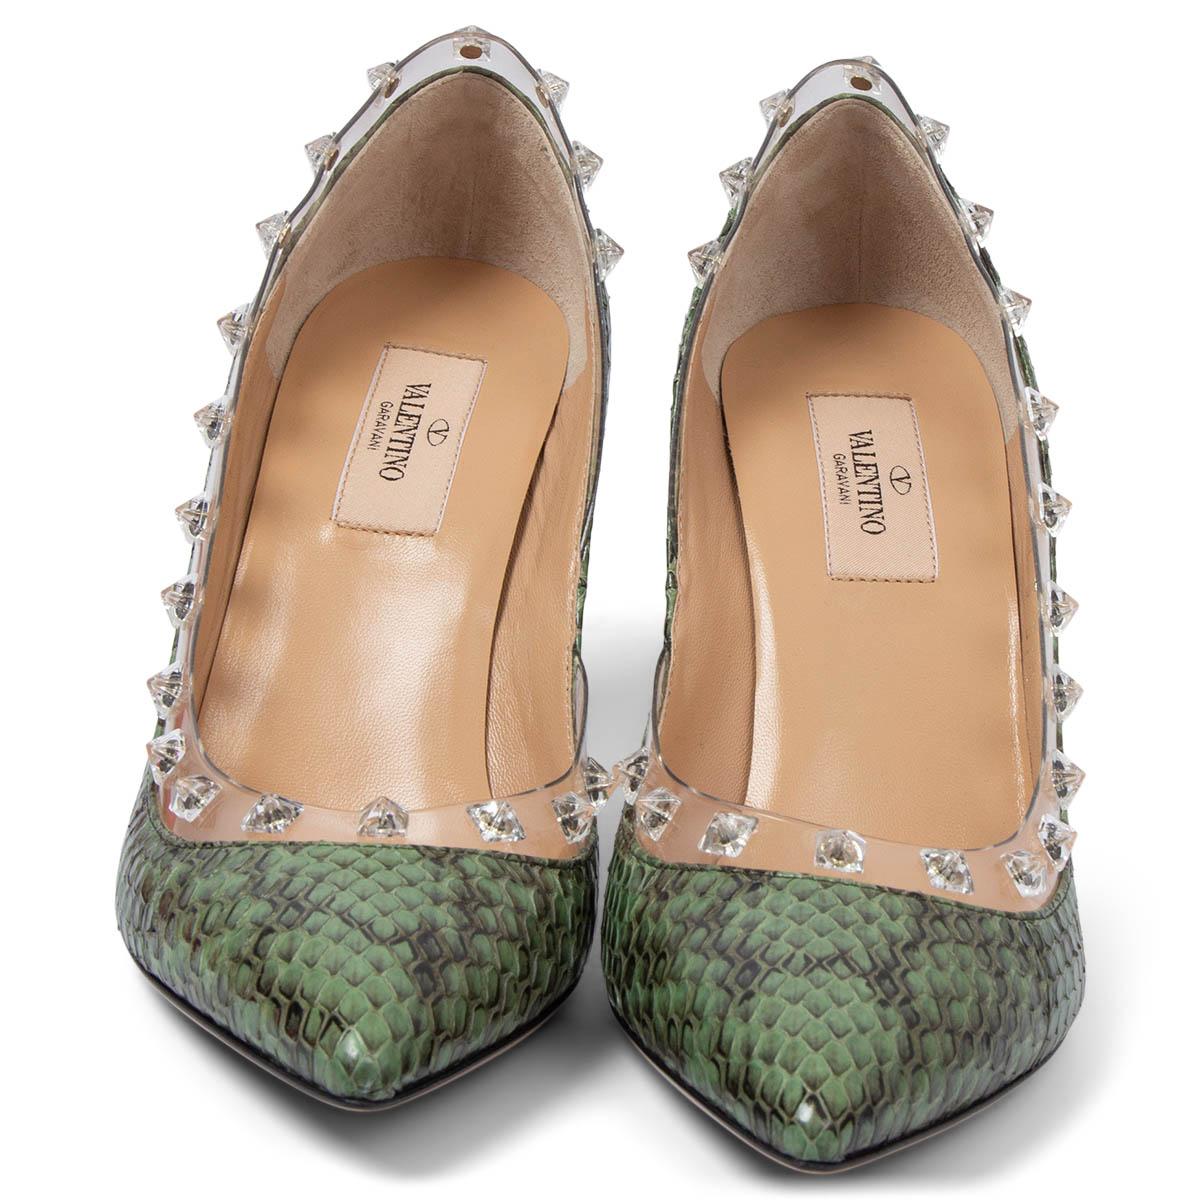 100% authentic Valentino Garavani Rockstud pointed-toe pumps in mint and black python featuring PVC trim and heel with clear Rockstuds. Brand new. Come with dust bag. 

Measurements
Imprinted Size	37.5
Shoe Size	37.5
Inside Sole	24.5cm